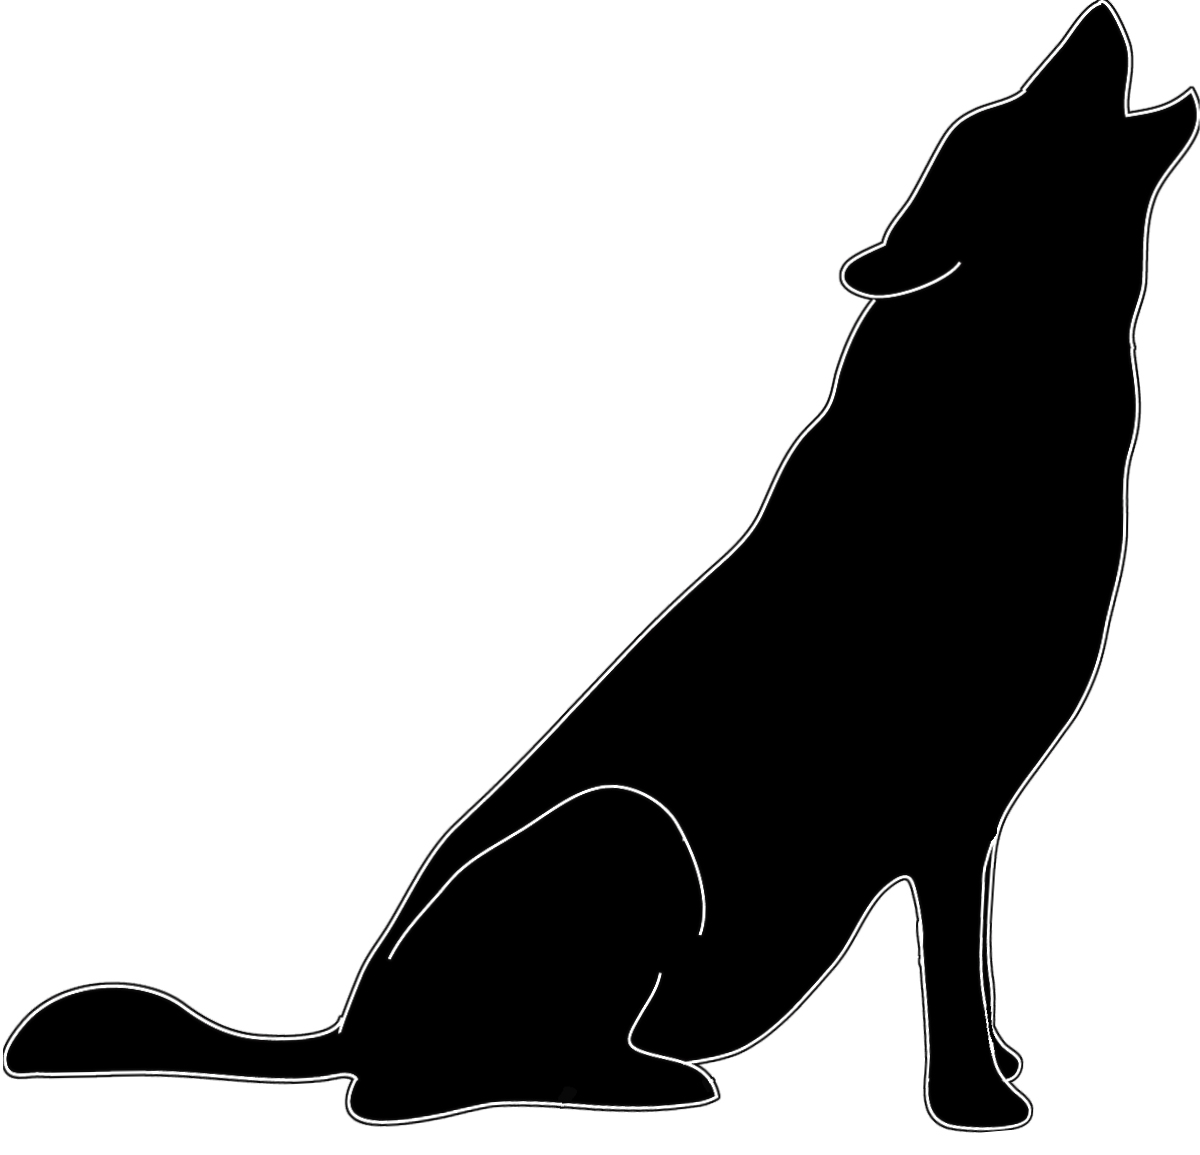 Tribal howling wolf clipart